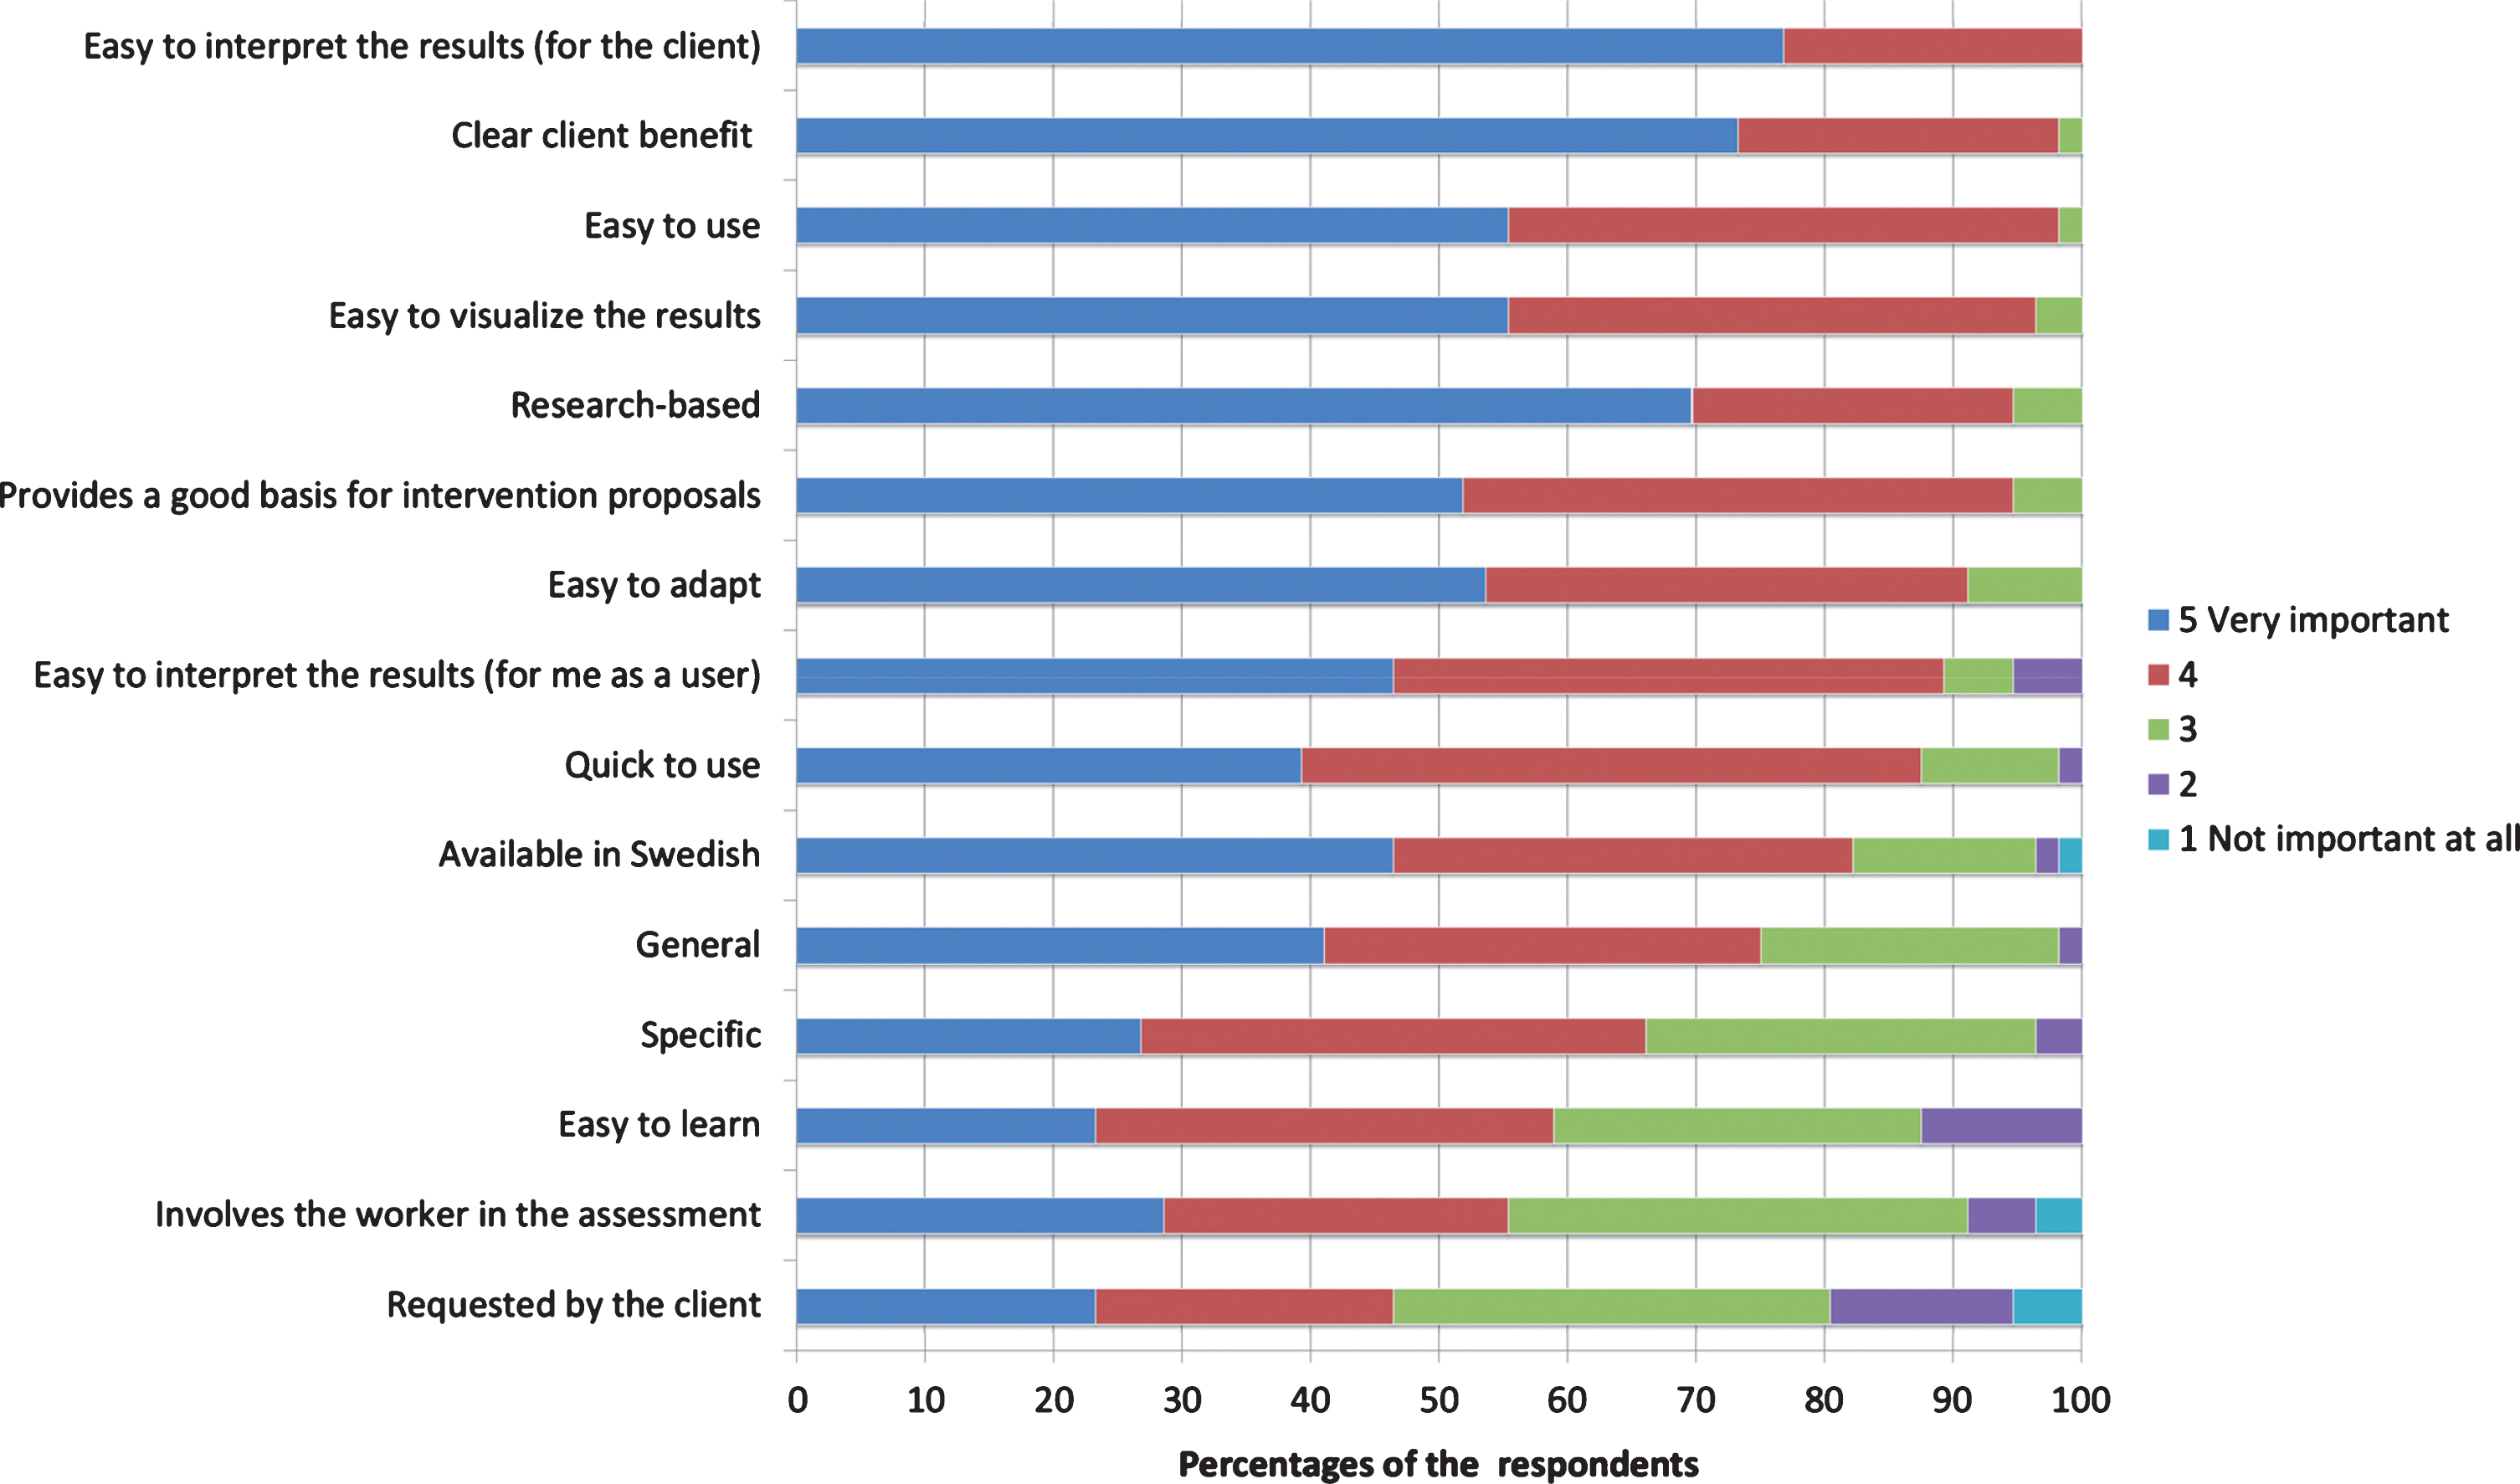 Rating of important attributes of OBRATs in general. Results from the web-based survey. The respective proportions of respondents that gave a rating from 1 (Not important at all) to 5 (Very important) are indicated (see key).